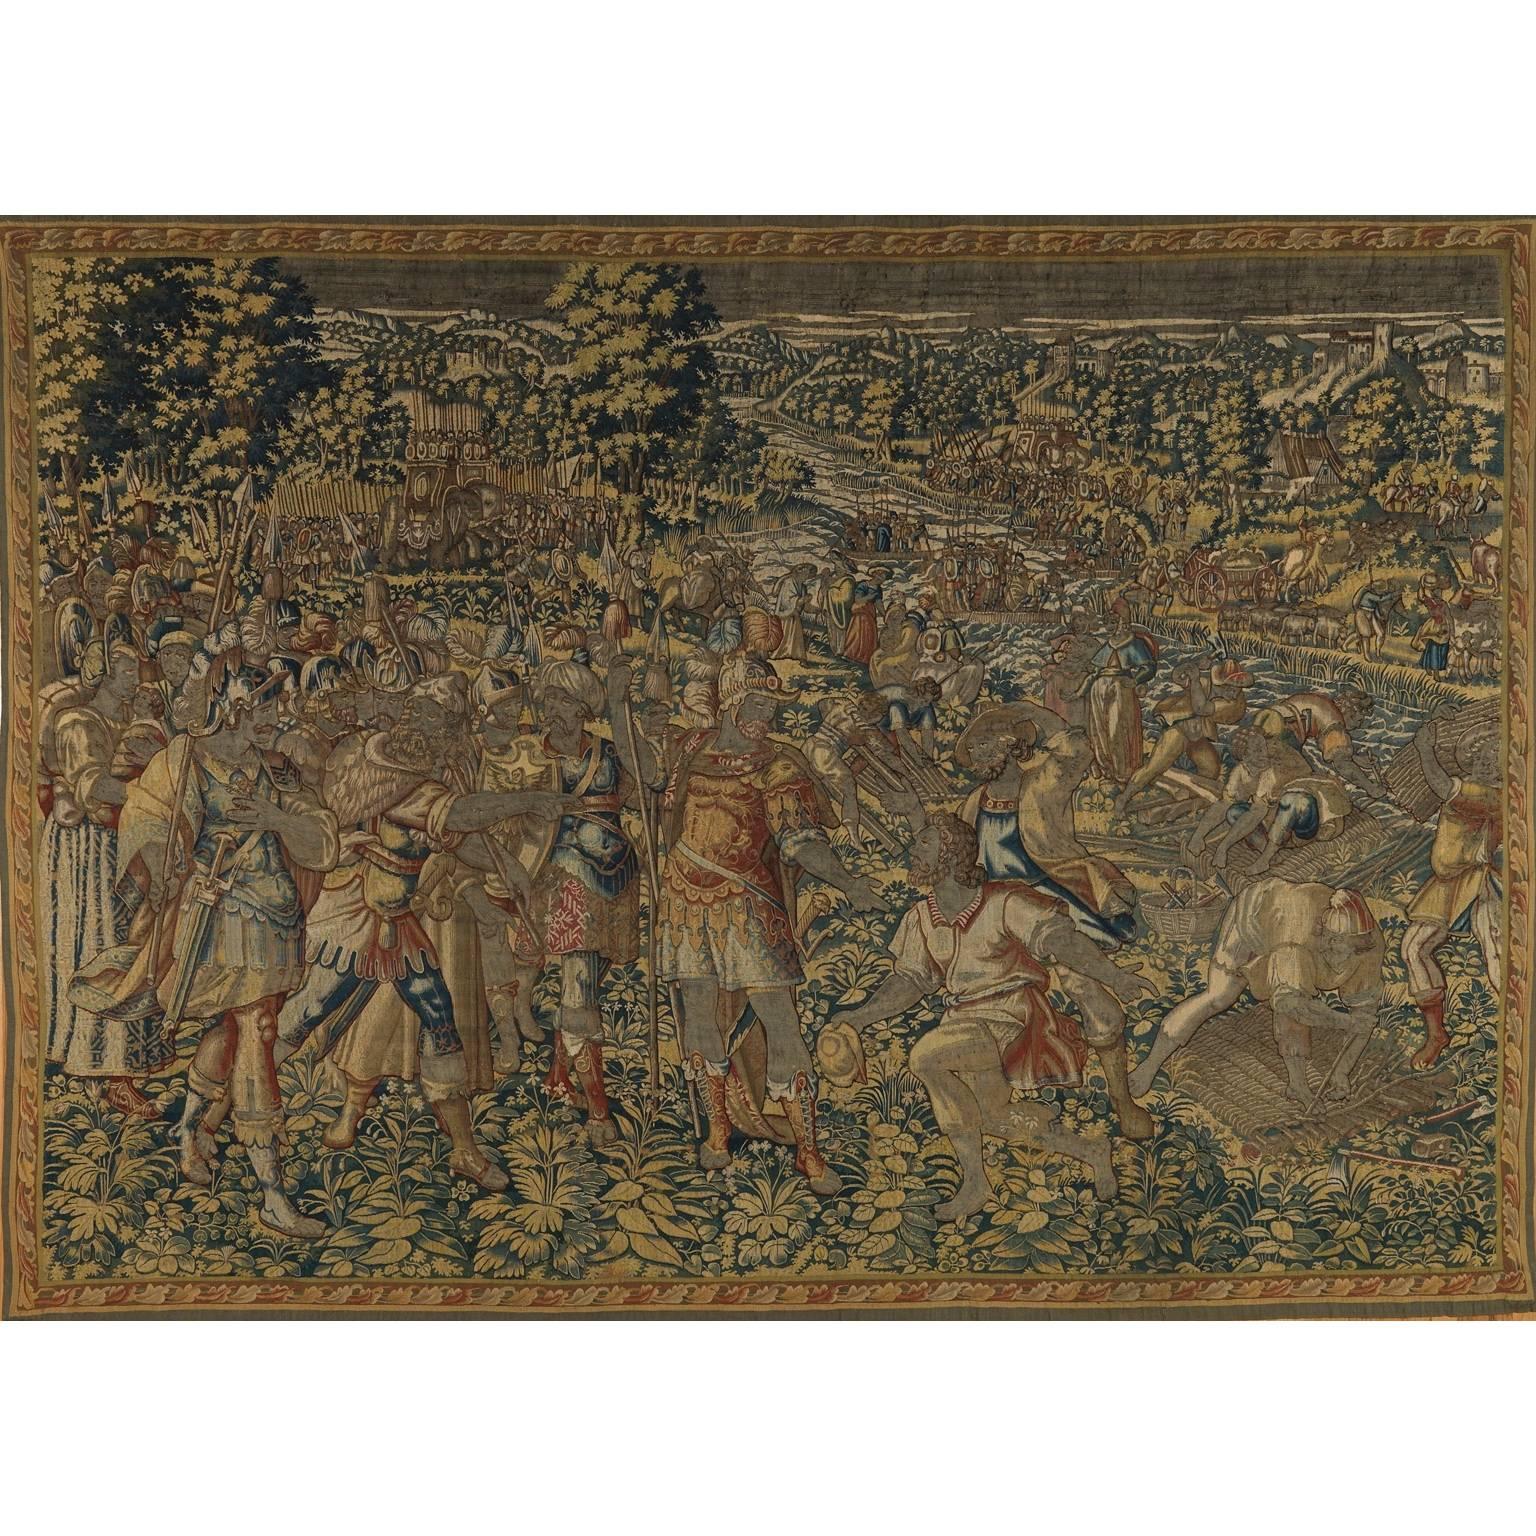 ANTIQUE HISTORICAL TAPESTRY